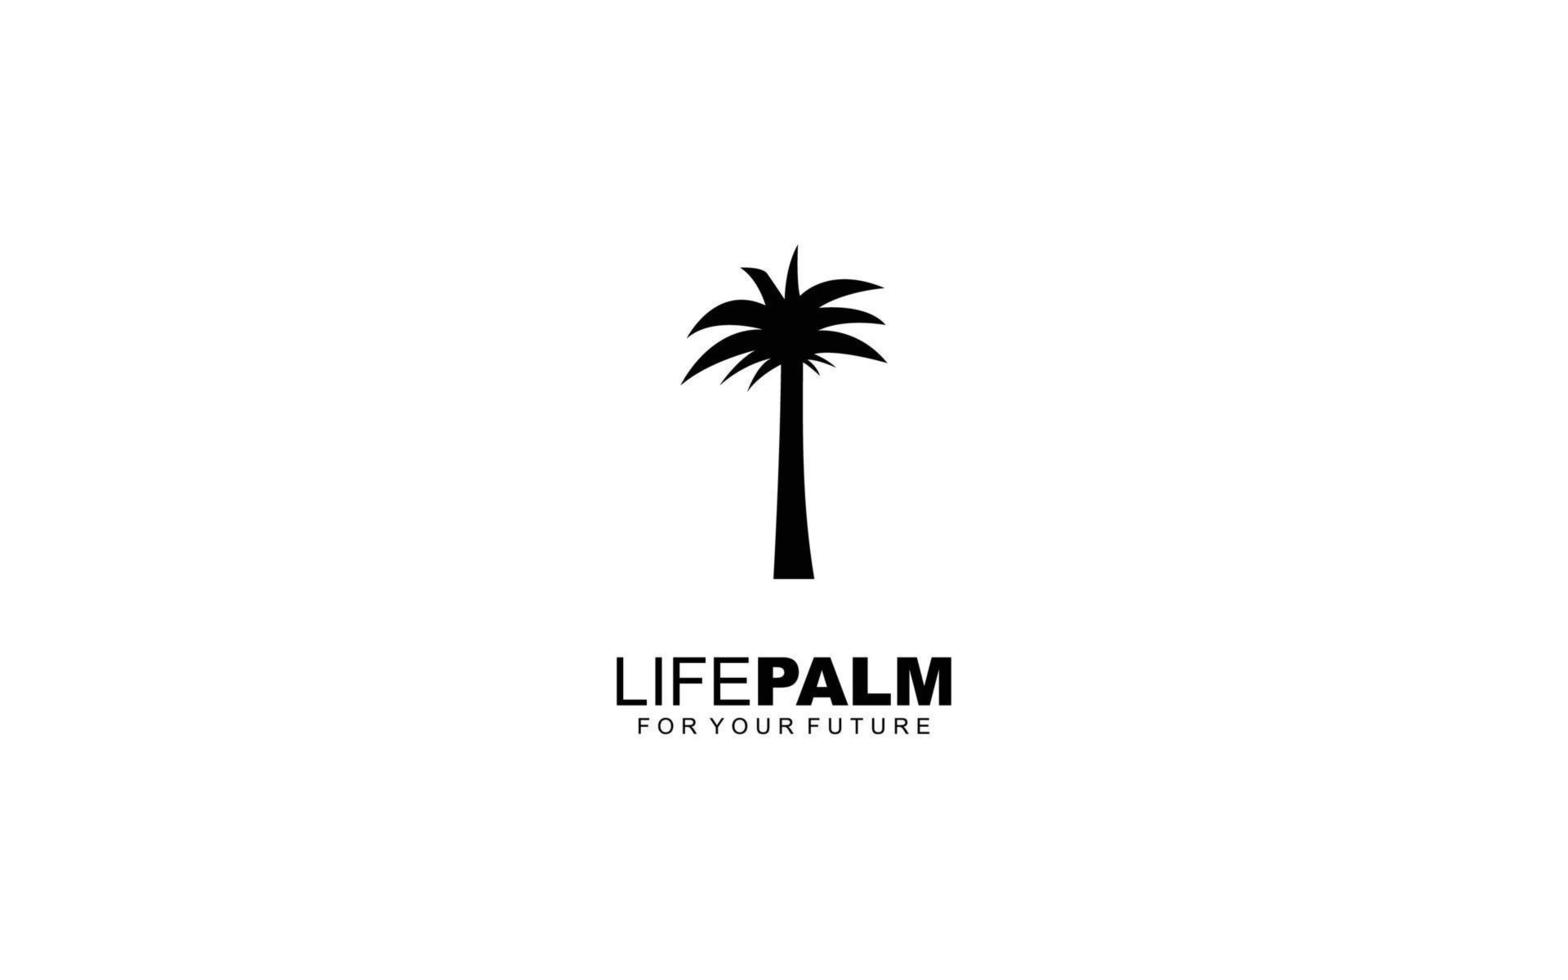 I logo PALM for identity. tree template vector illustration for your brand.